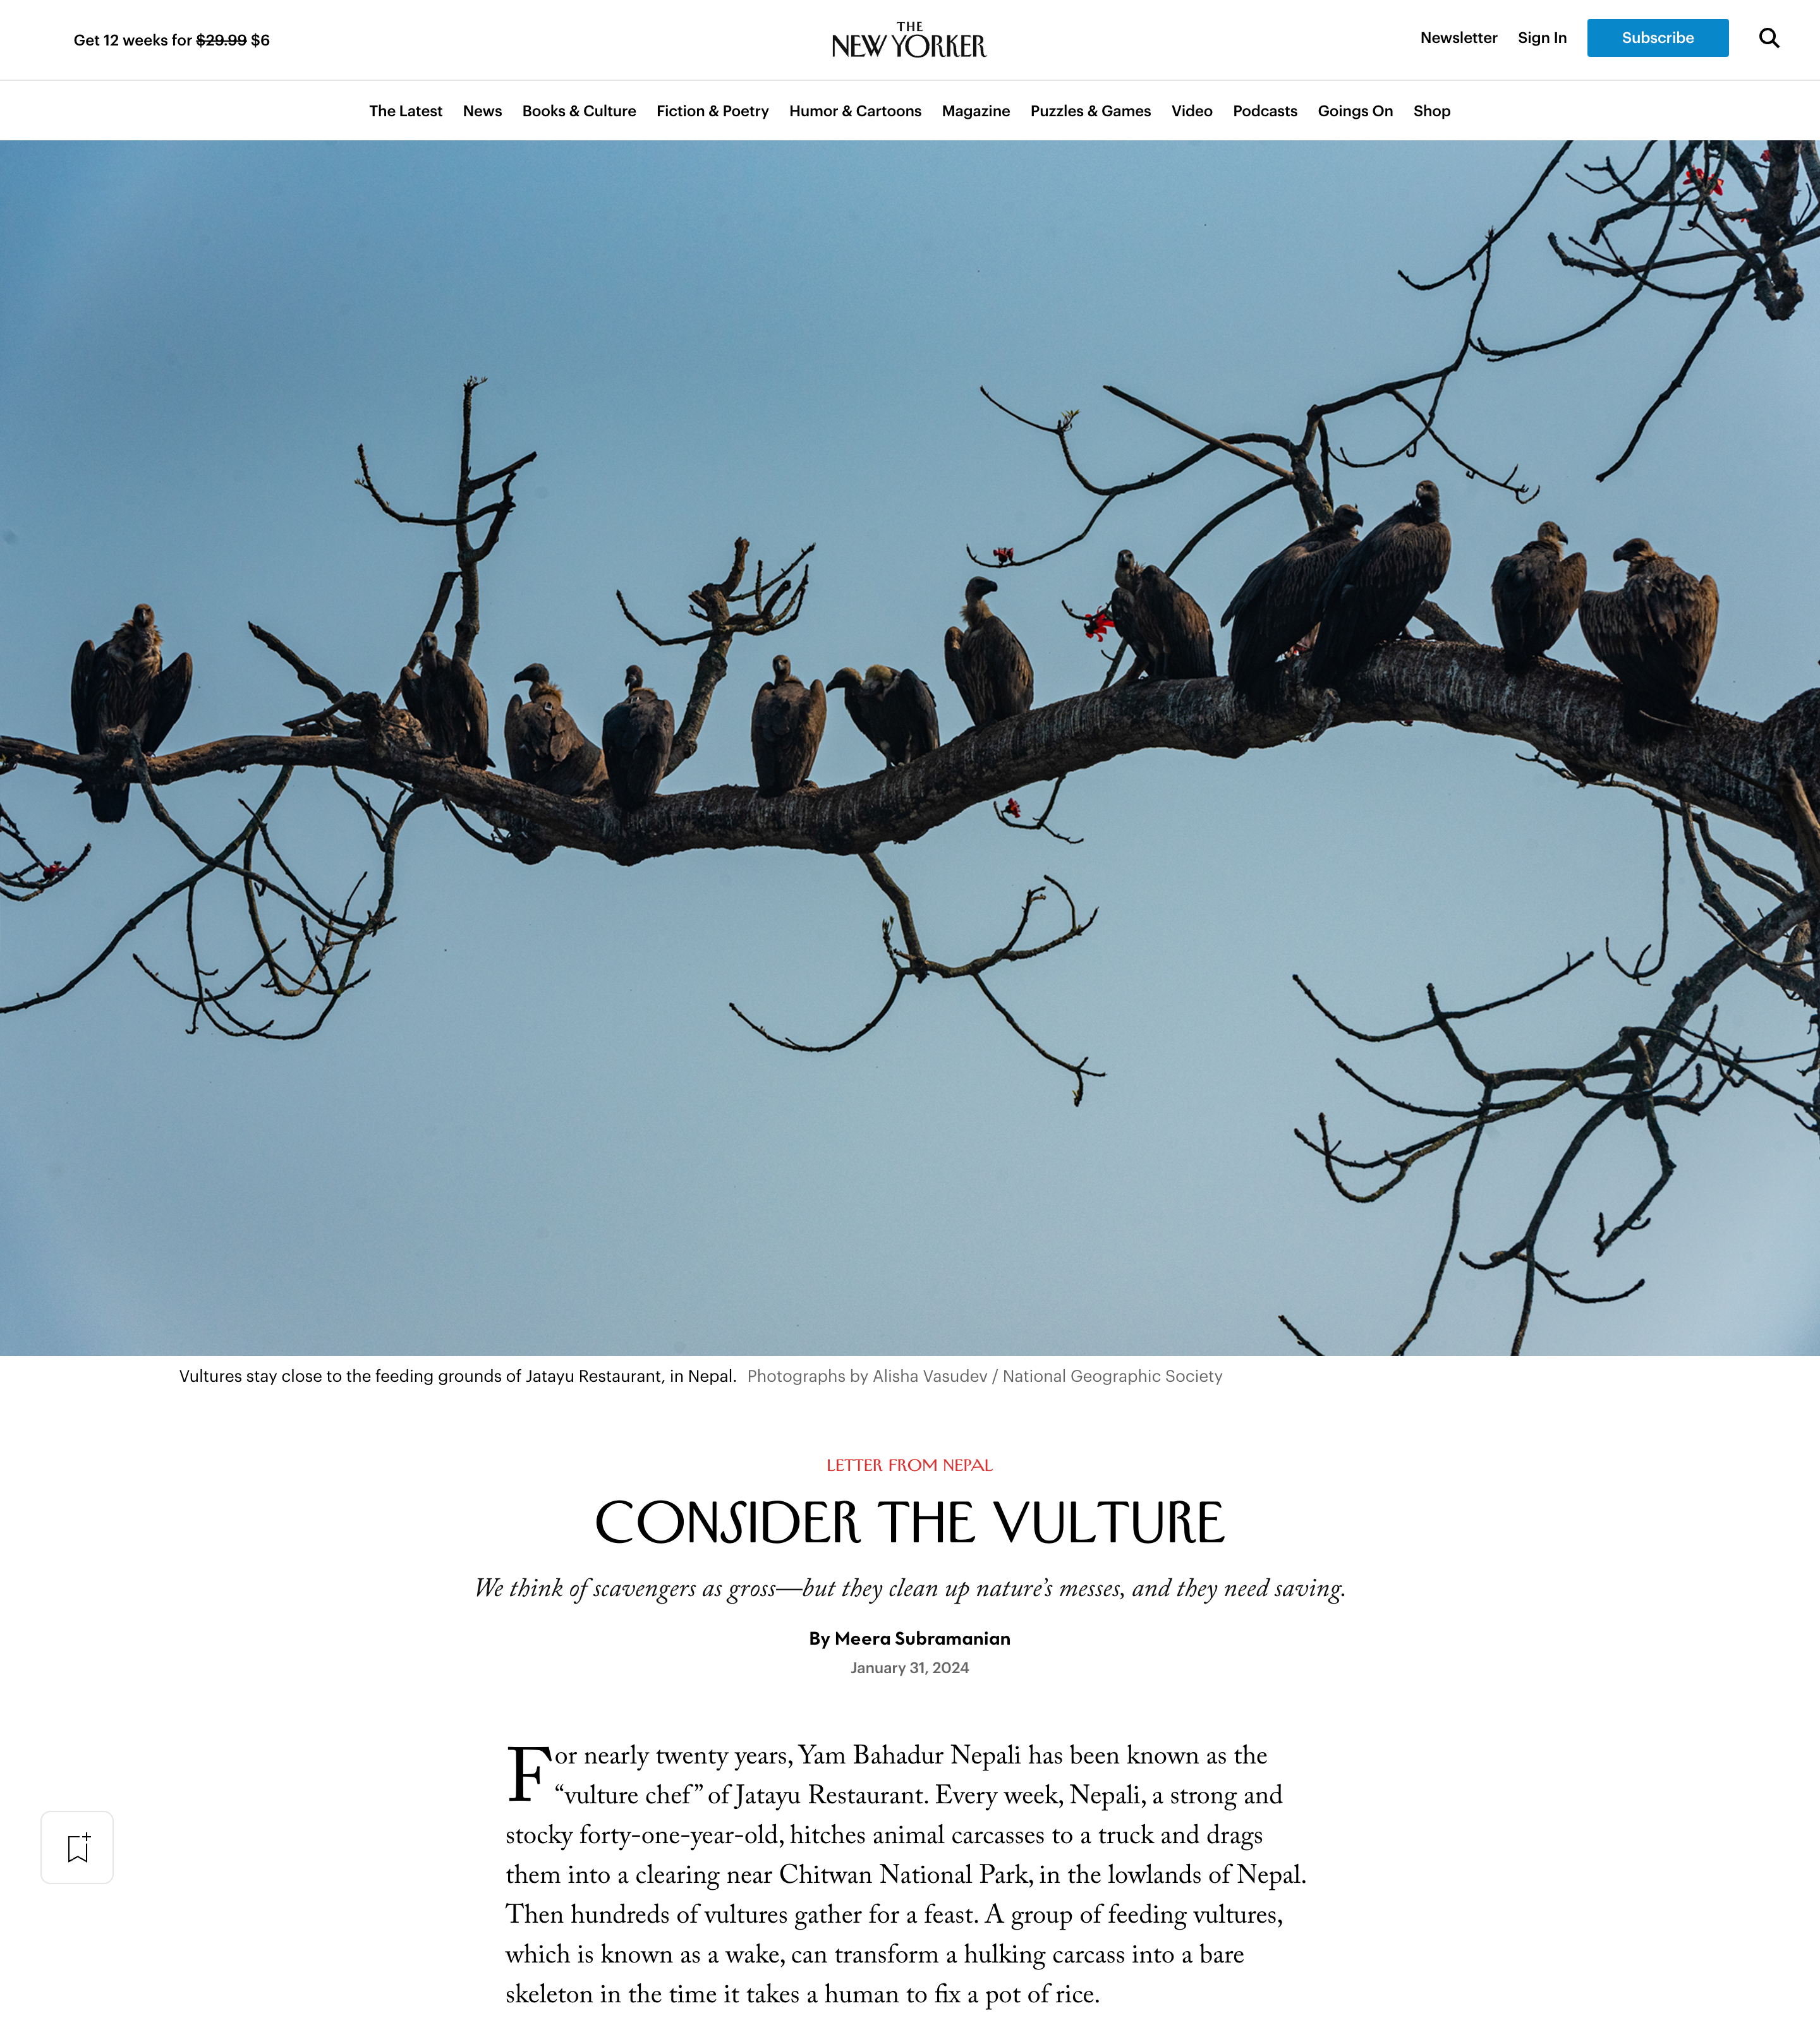 The New Yorker: Letter from Nepal:Consider the Vulture